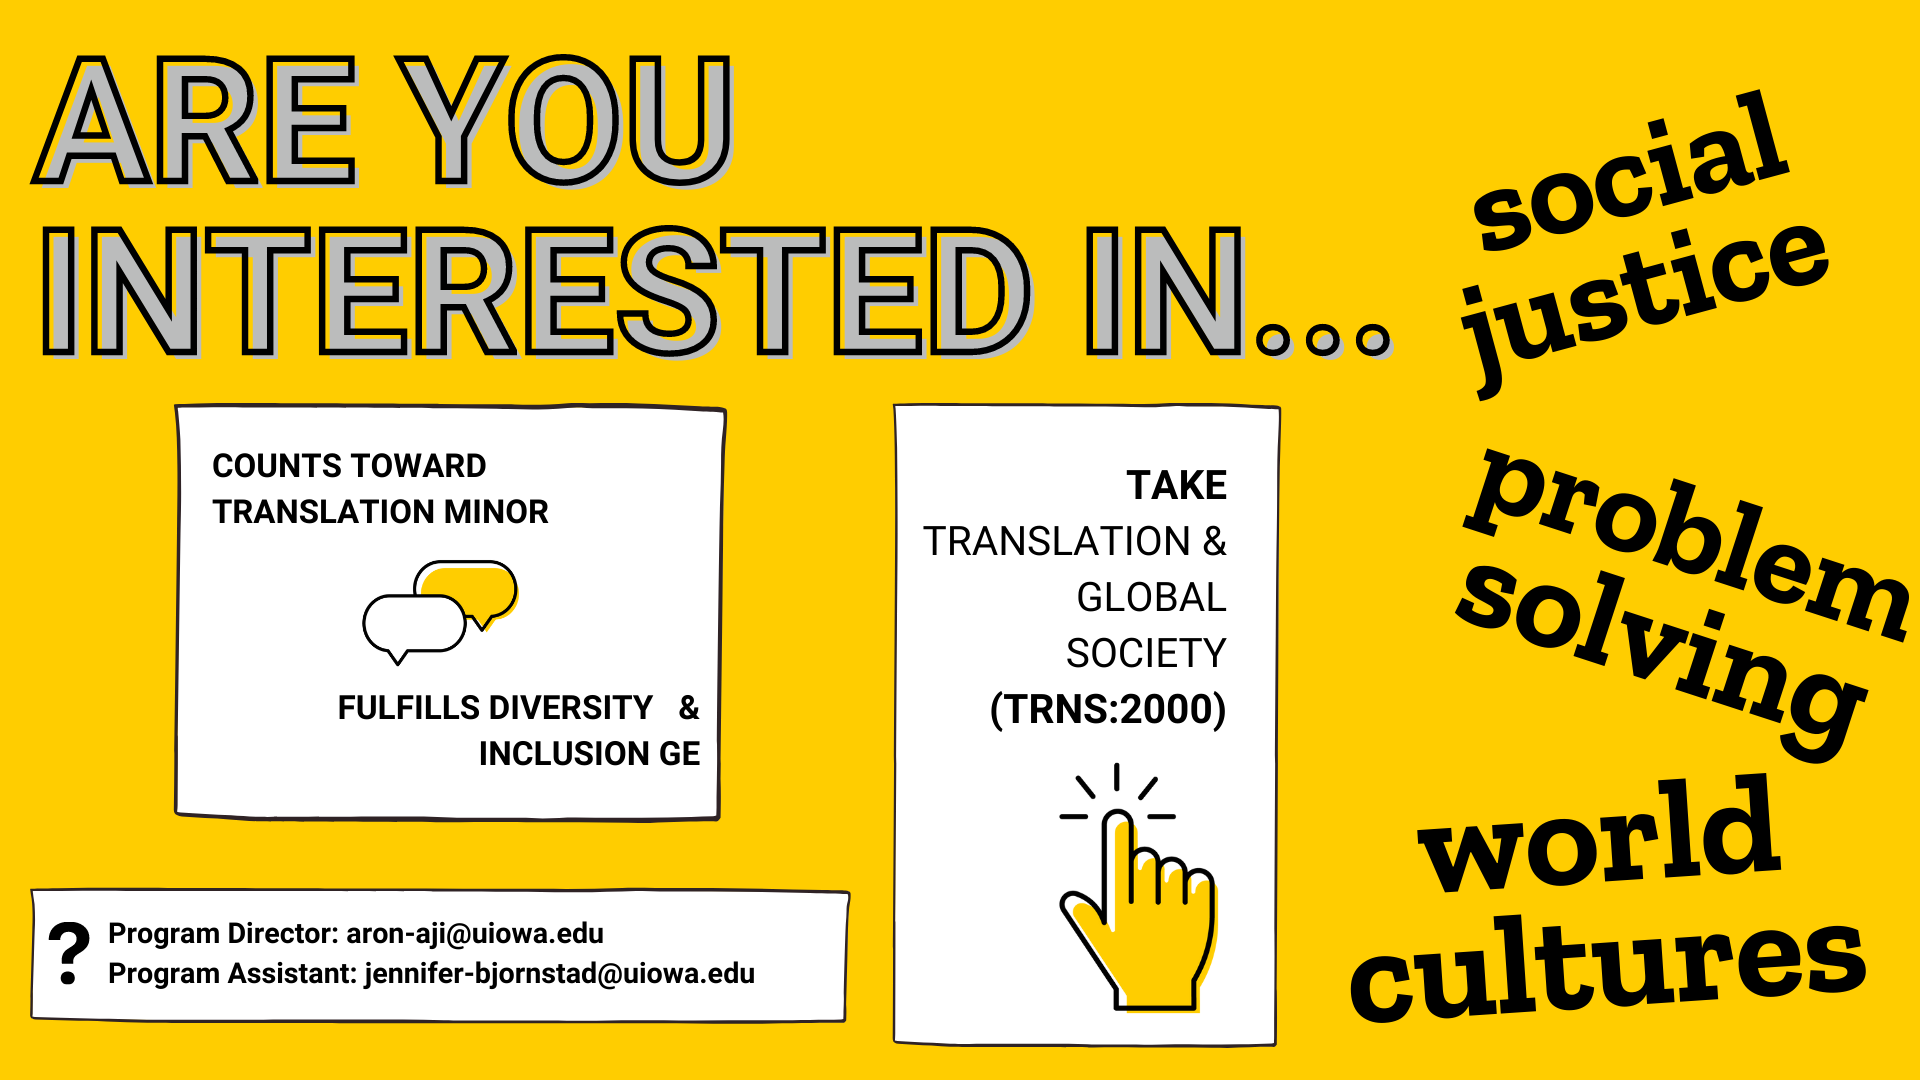 Are you interested in social justice problem solving and world cultures? Take translation and global society class code TRNS 2000. it counts toward your translation minor and fulfills diversity and inclusion gen ed requirement. Have questions? Contact the program director at aron-aji@uiowa.edu or the program assistant at jennifer-bjornstad@uiowa.edu